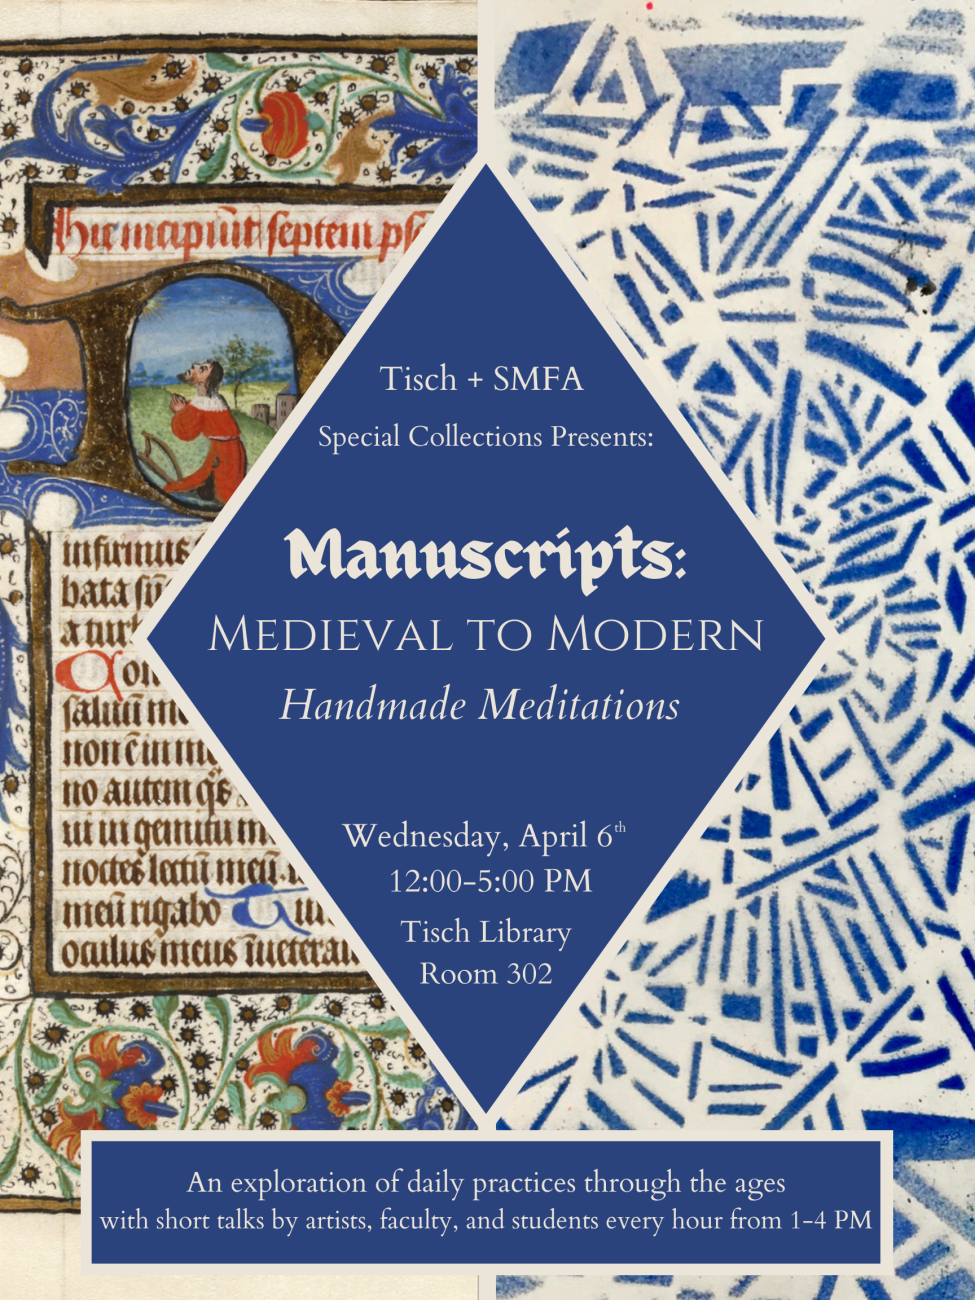 Flyer for event Manuscripts Medieval to Modern: Handmade Meditations. The event will take place on Wednesday, April 6th from 12:00-5:00 PM in Tisch Library Room 302 and is presented by Tisch and SMFA Special Collections.